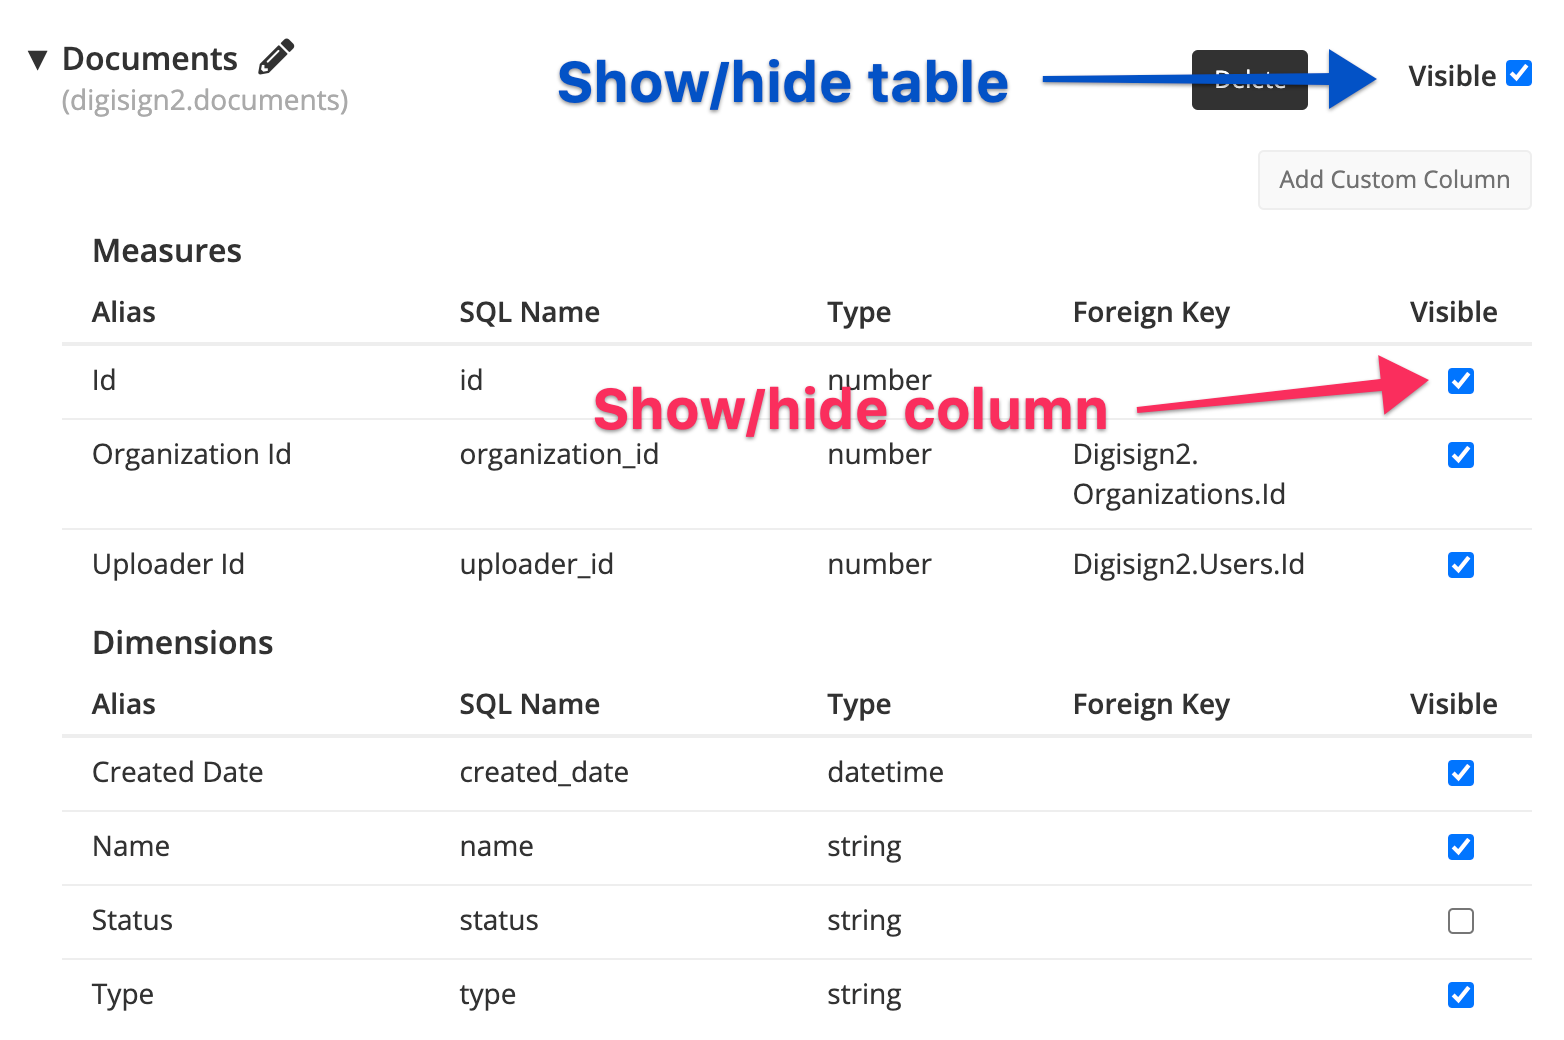 Select if a table or column is visible